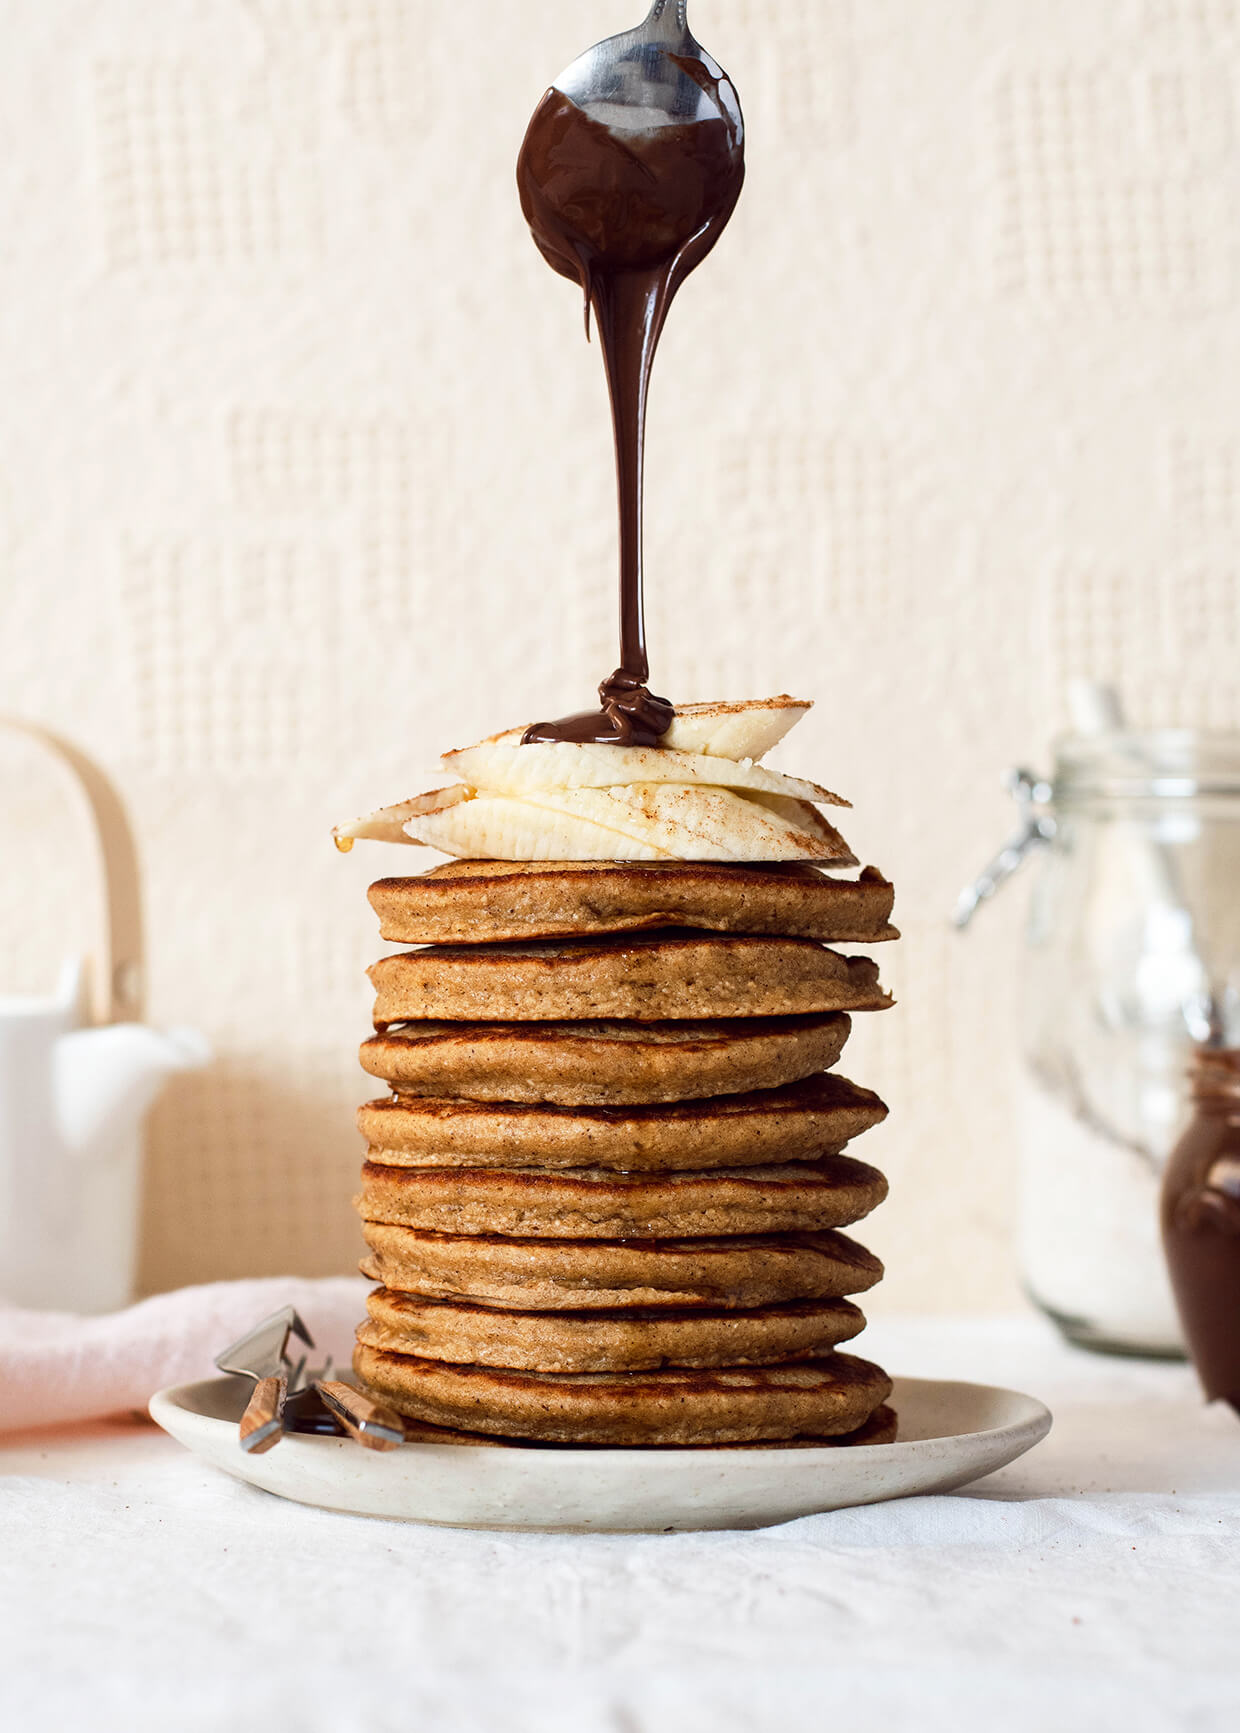 Recipe for fluffy simple oatmeal banana pancakes - a healthy version of your regular pancakes.